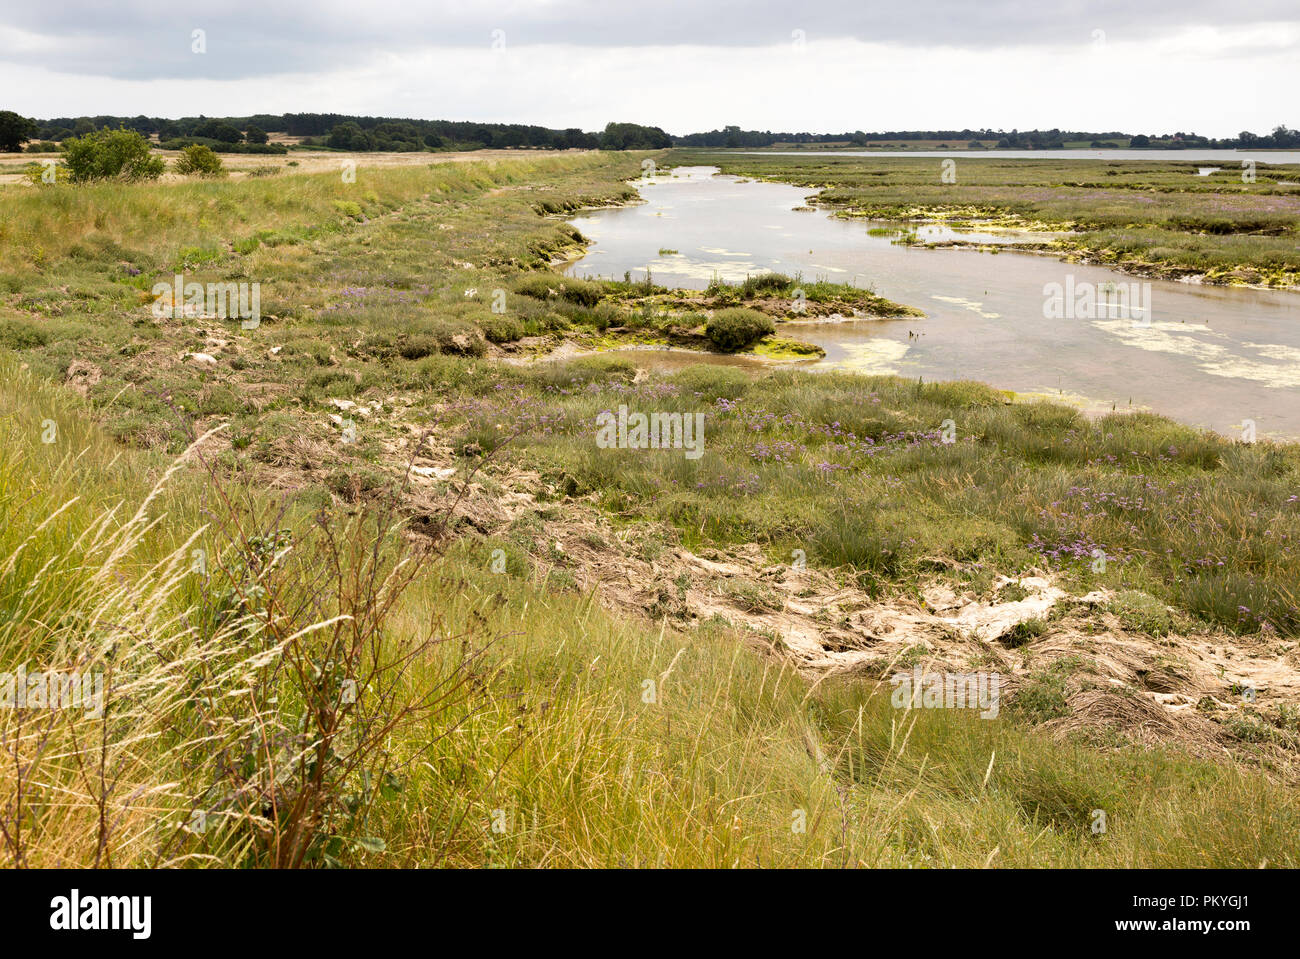 Flood defence river wall and salt marshes of River Deben tidal estuary, Sutton, Suffolk, England, UK Stock Photo